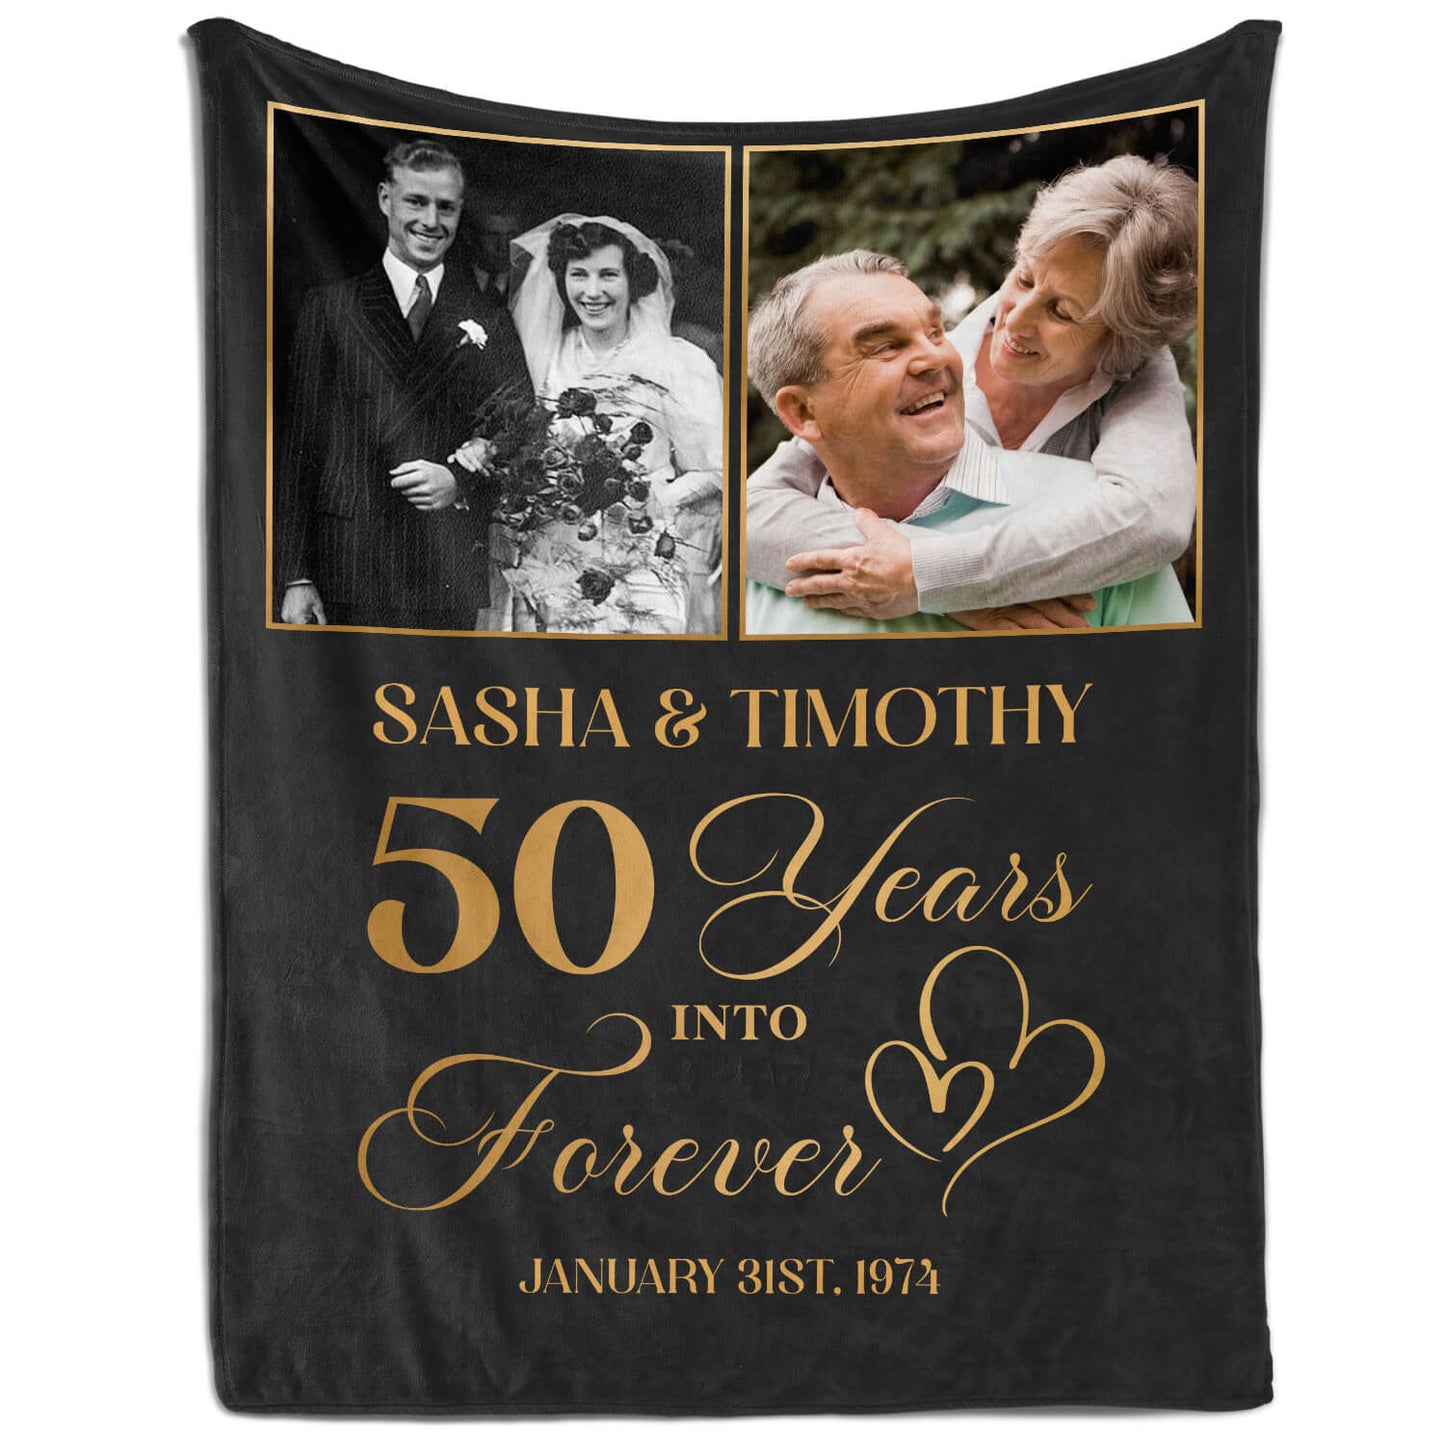 50 Years Into Forever - Personalized 50 Year Anniversary gift For Husband or Wife - Custom Blanket - MyMindfulGifts